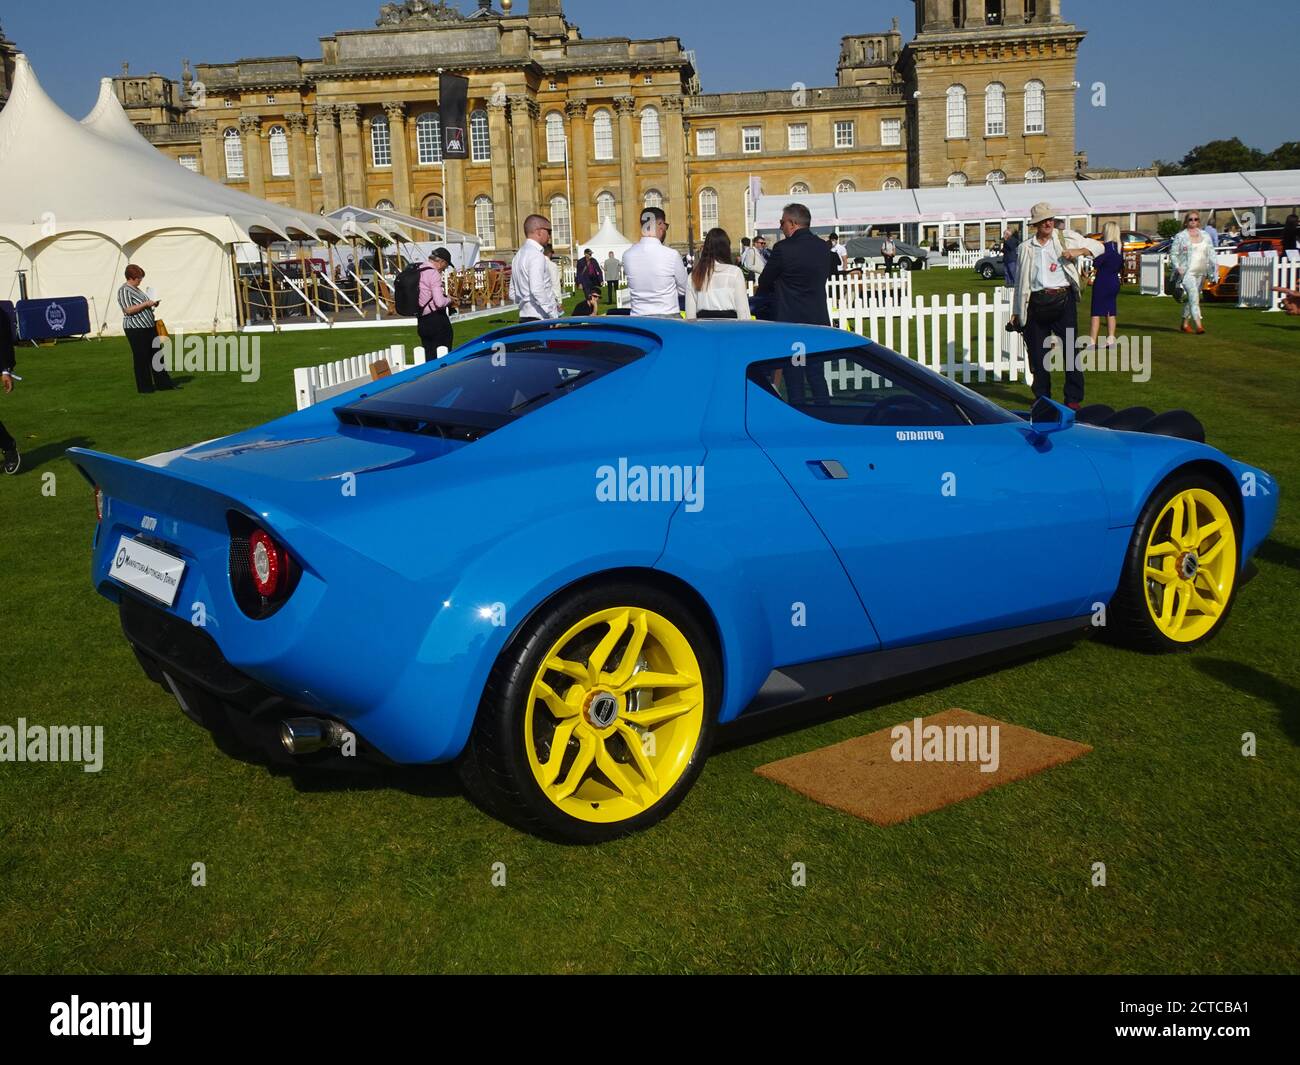 Blenheim Palace, Oxford, UK. 22nd Sep, 2020. Lancia Stratos in French Blue poses At the famous Salon Prive held at Blenheim Palace Credit: Motofoto/Alamy Live News Stock Photo